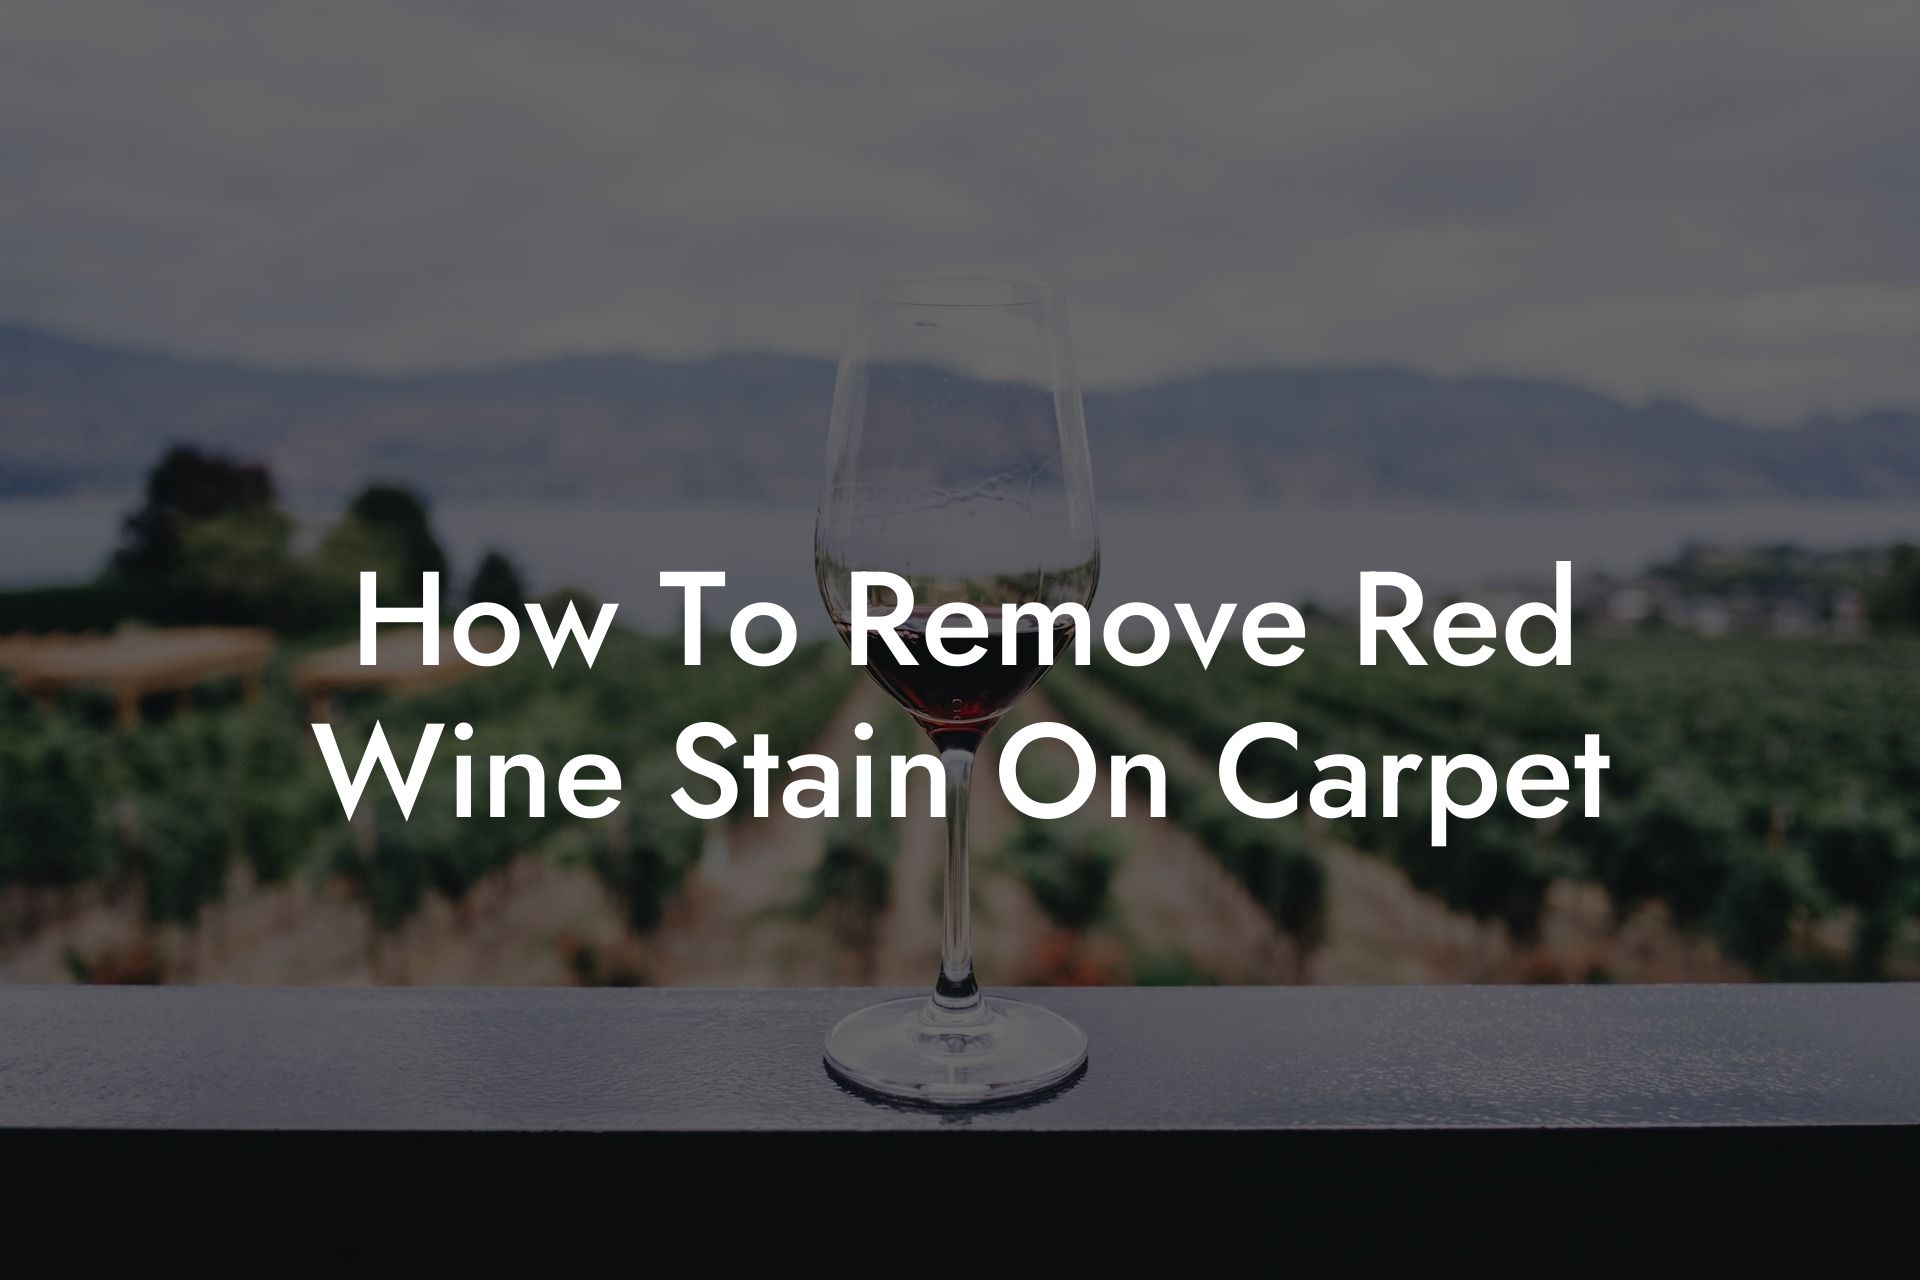 How To Remove Red Wine Stain On Carpet